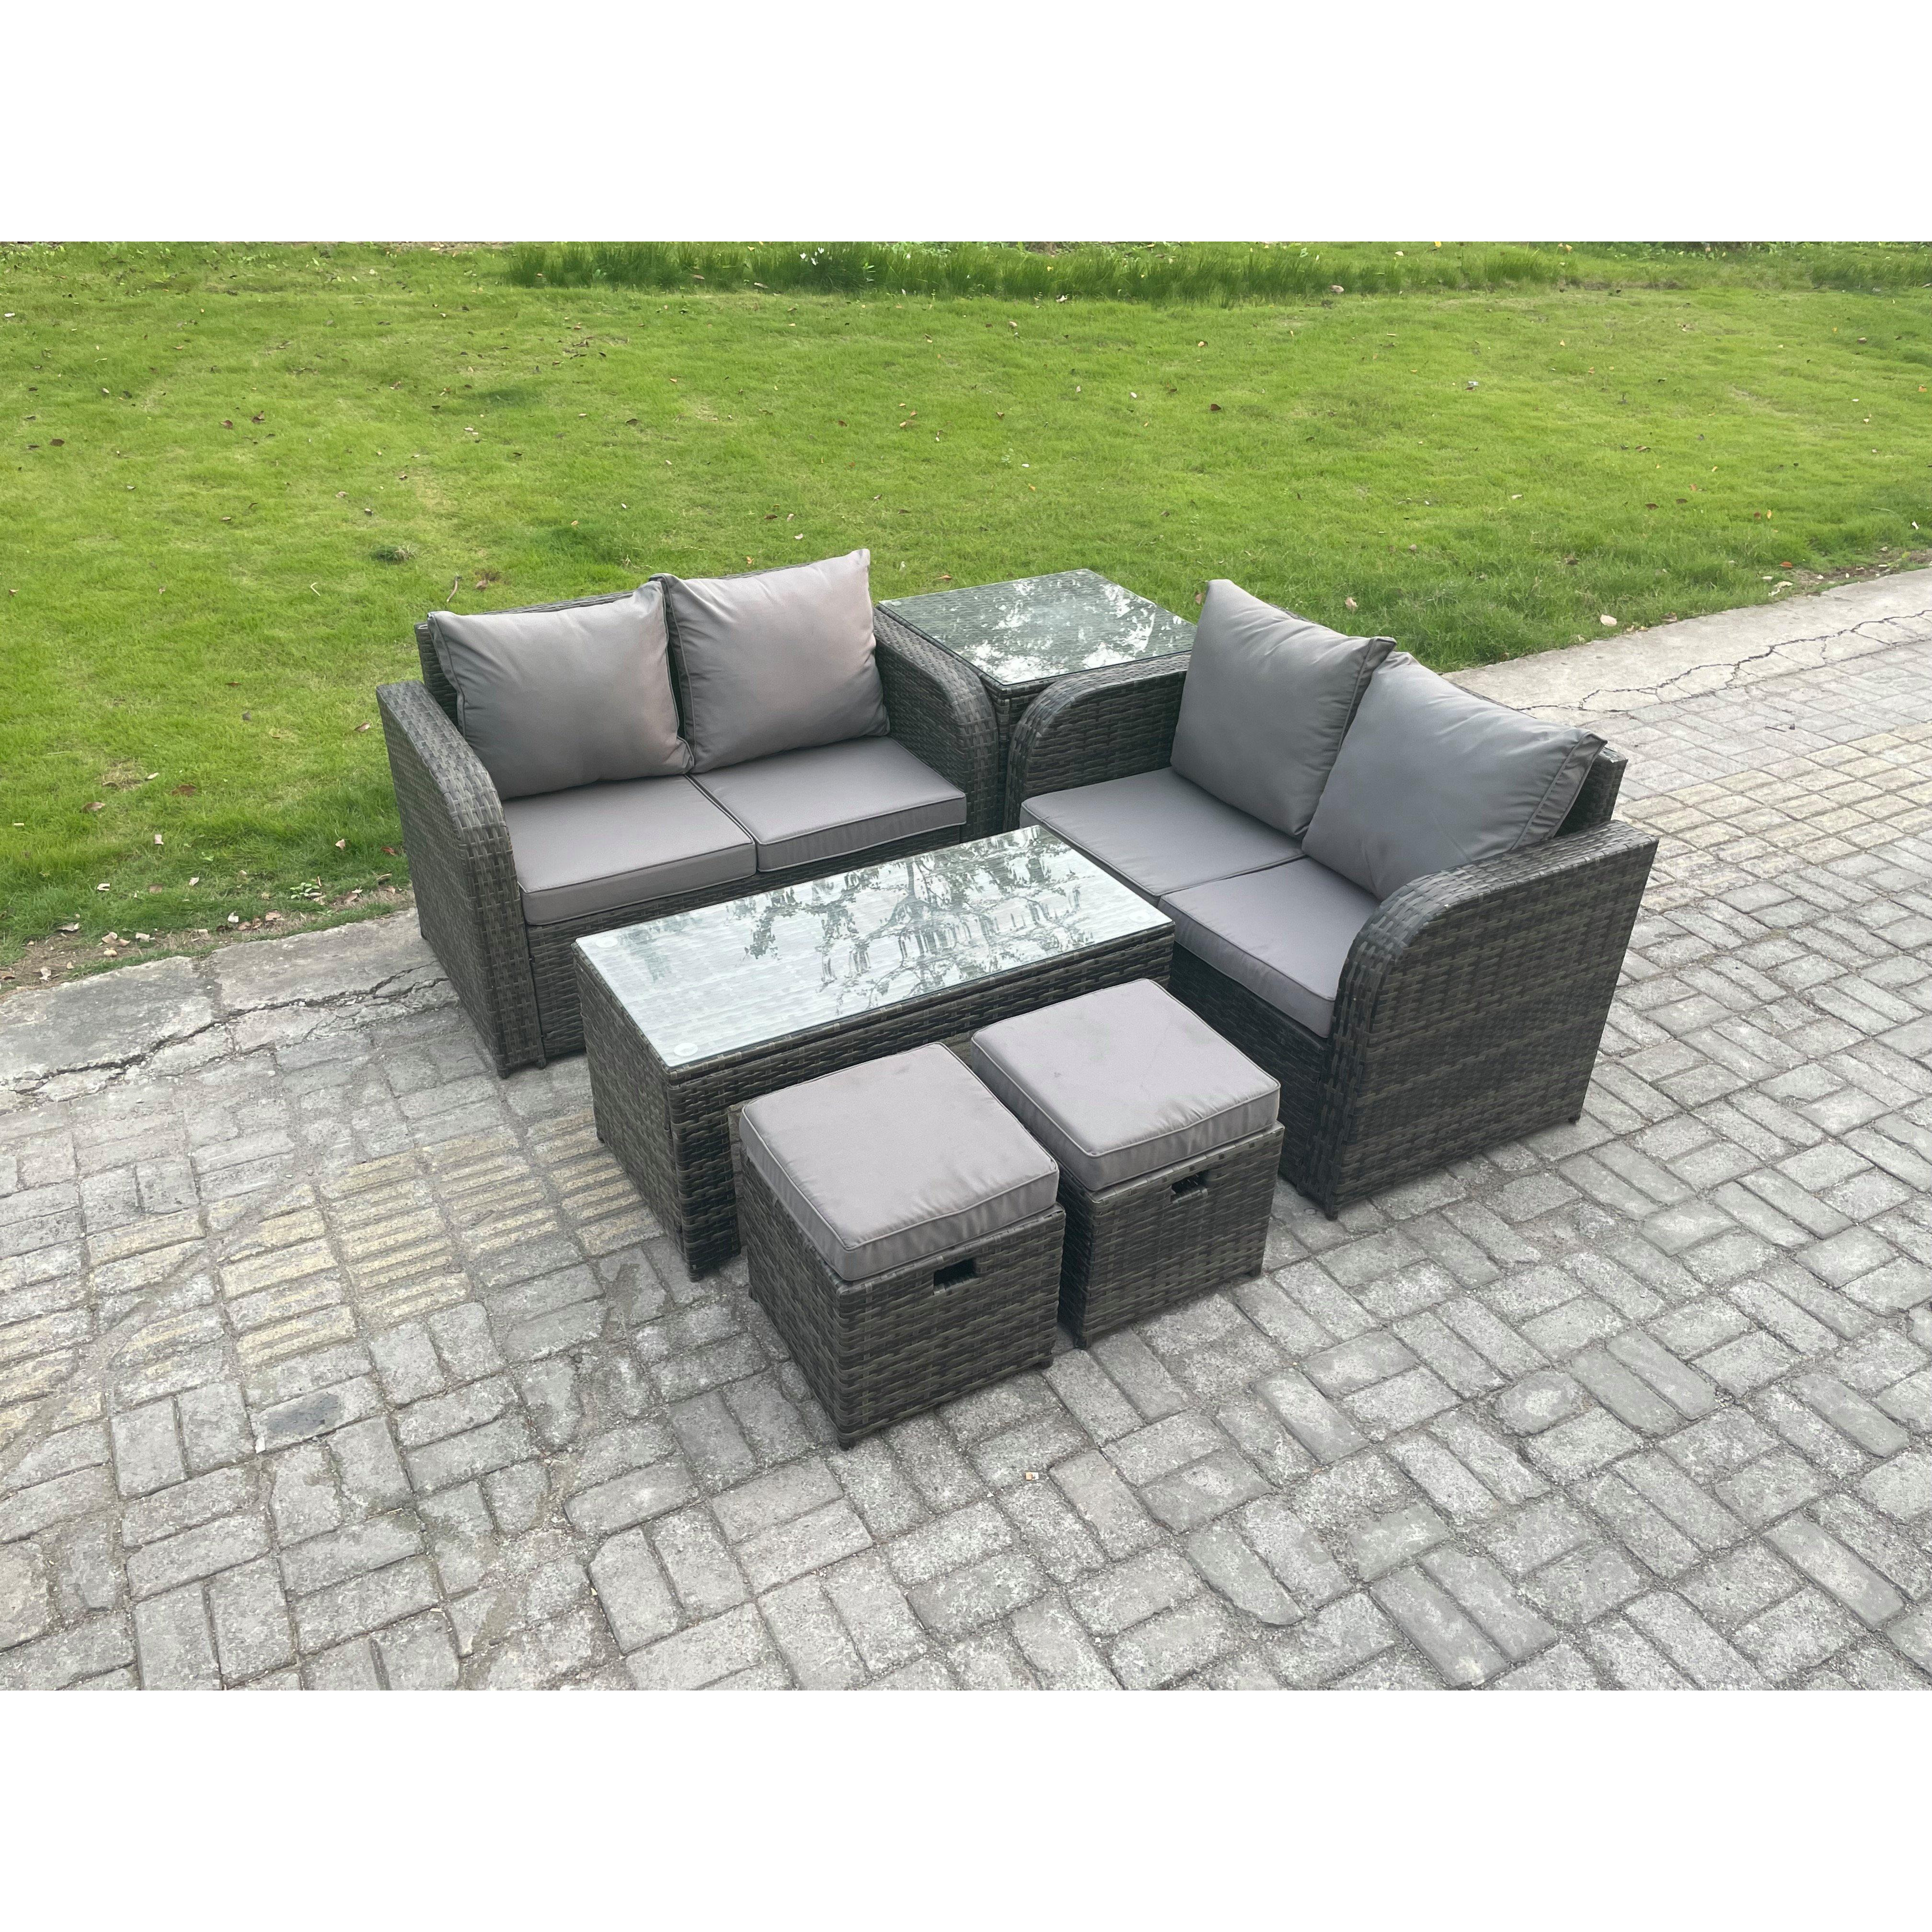 High Back Rattan Garden Furniture Set with Loveseat Sofa Coffee Table 2 Small Footstool Outdoor Patio Sofa Set - image 1